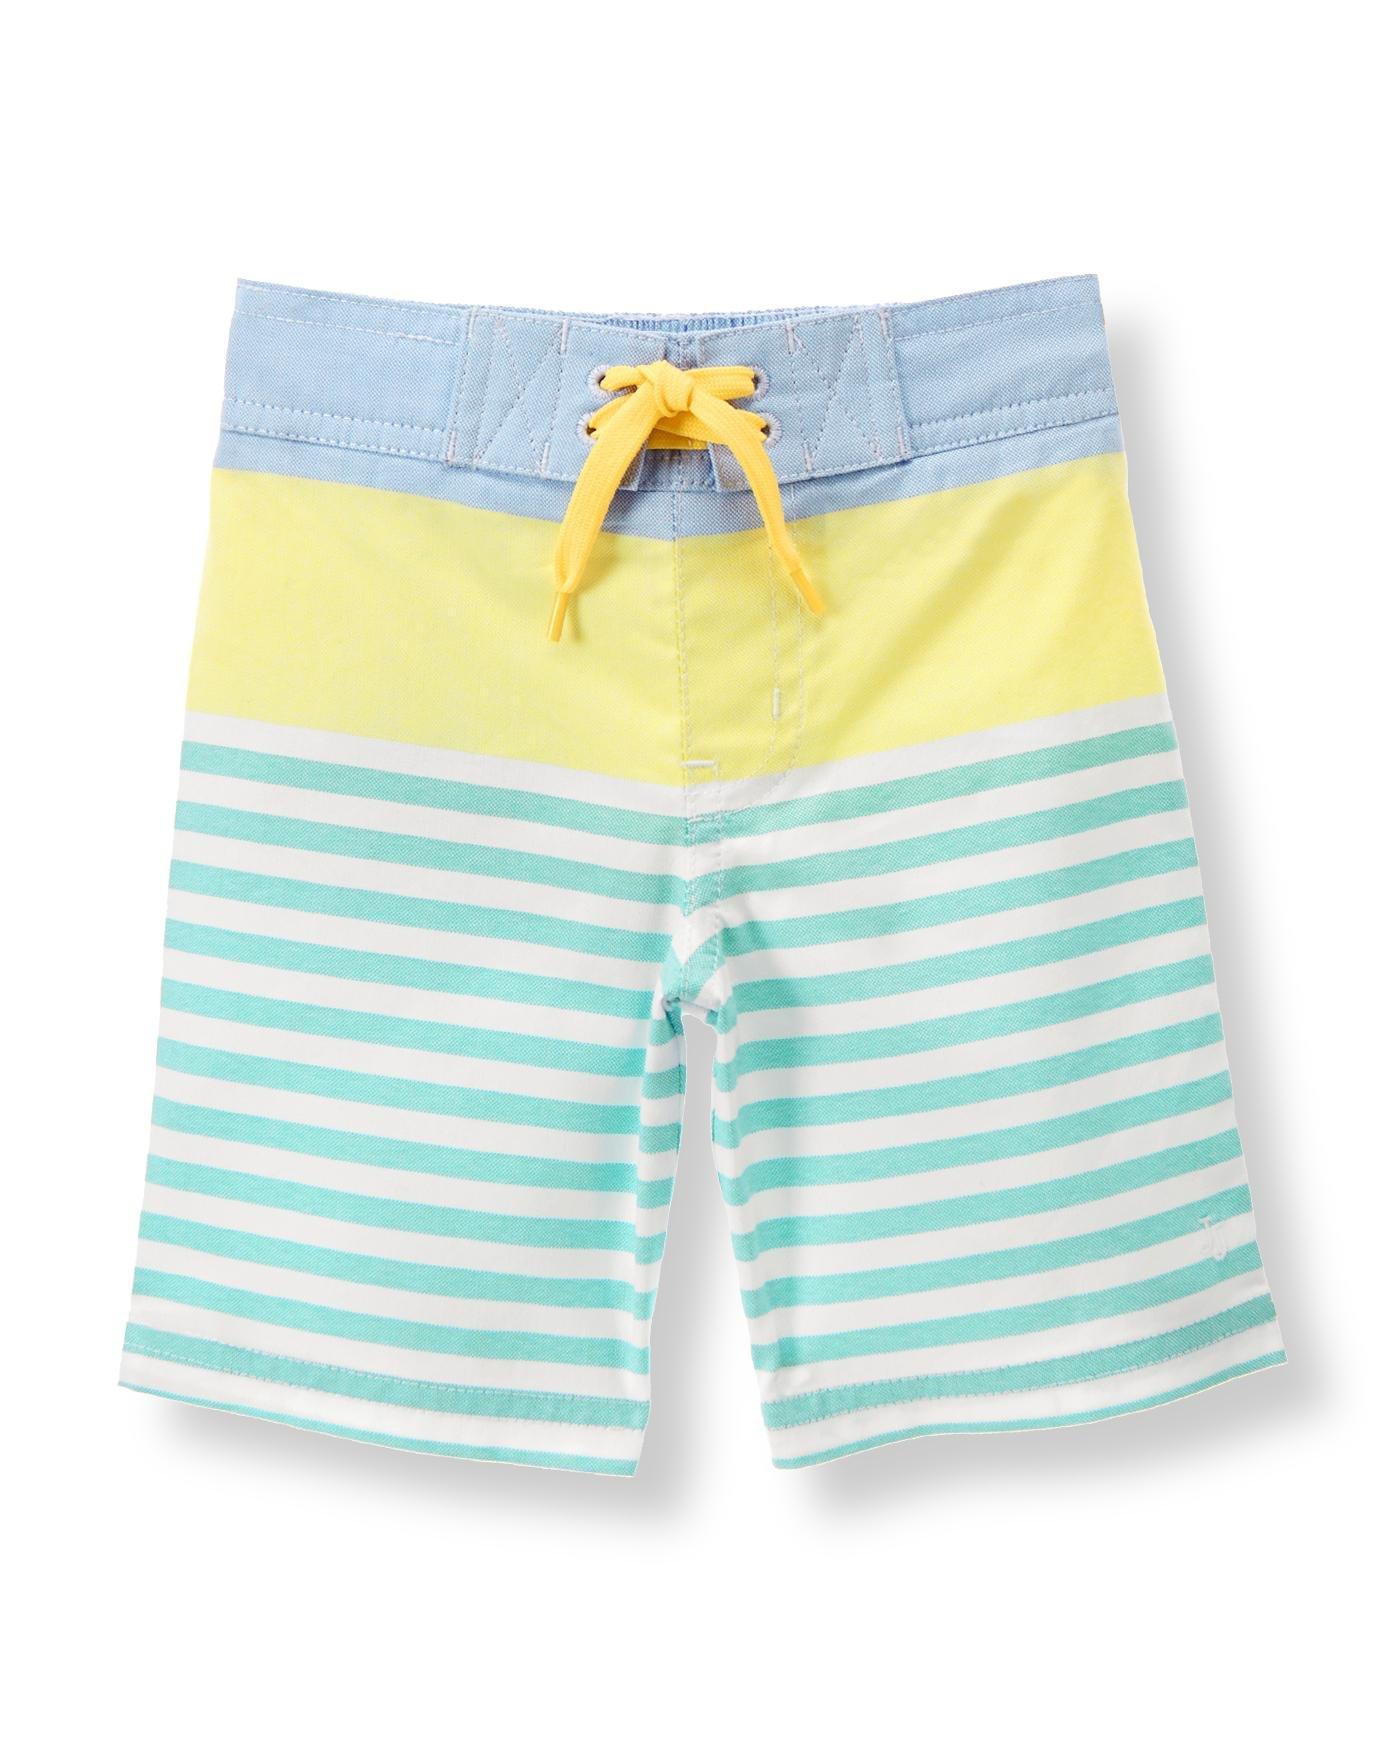 Striped Oxford Swim Trunk image number 0